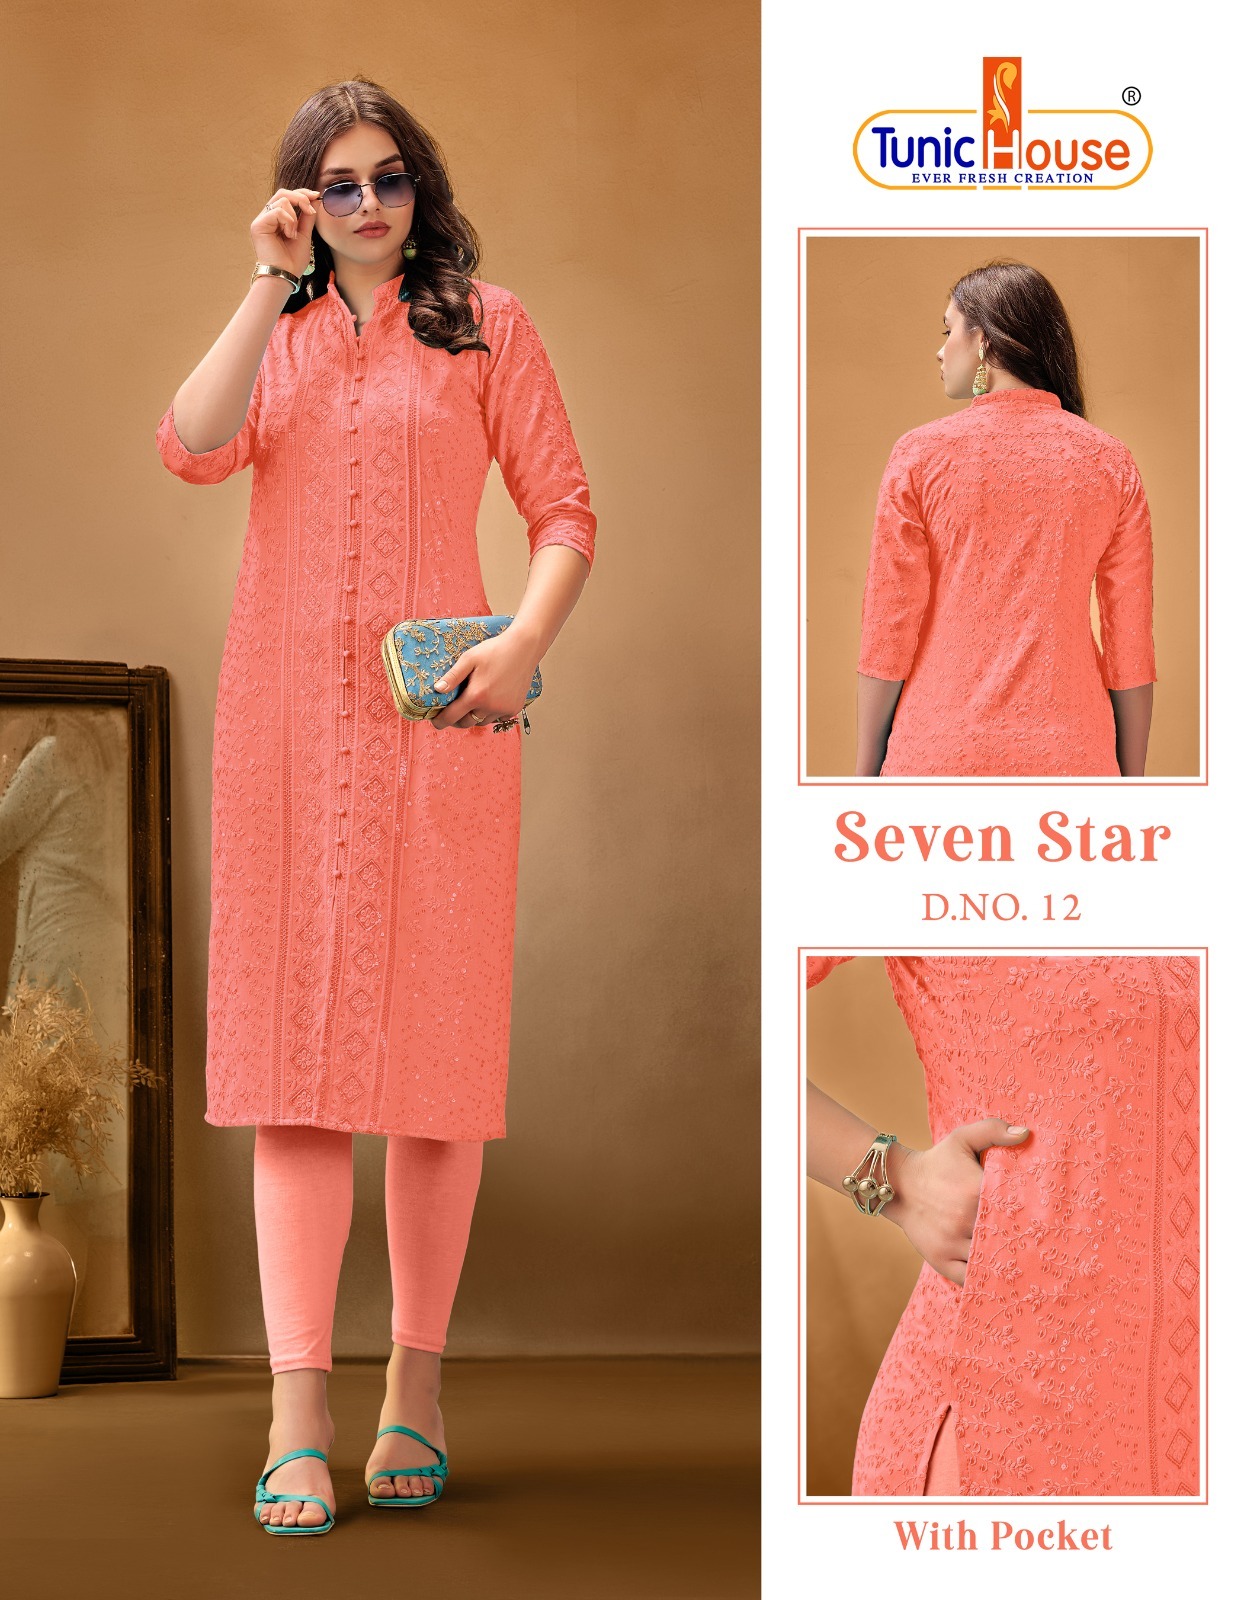 Tunic Houes 7 Star collection 11